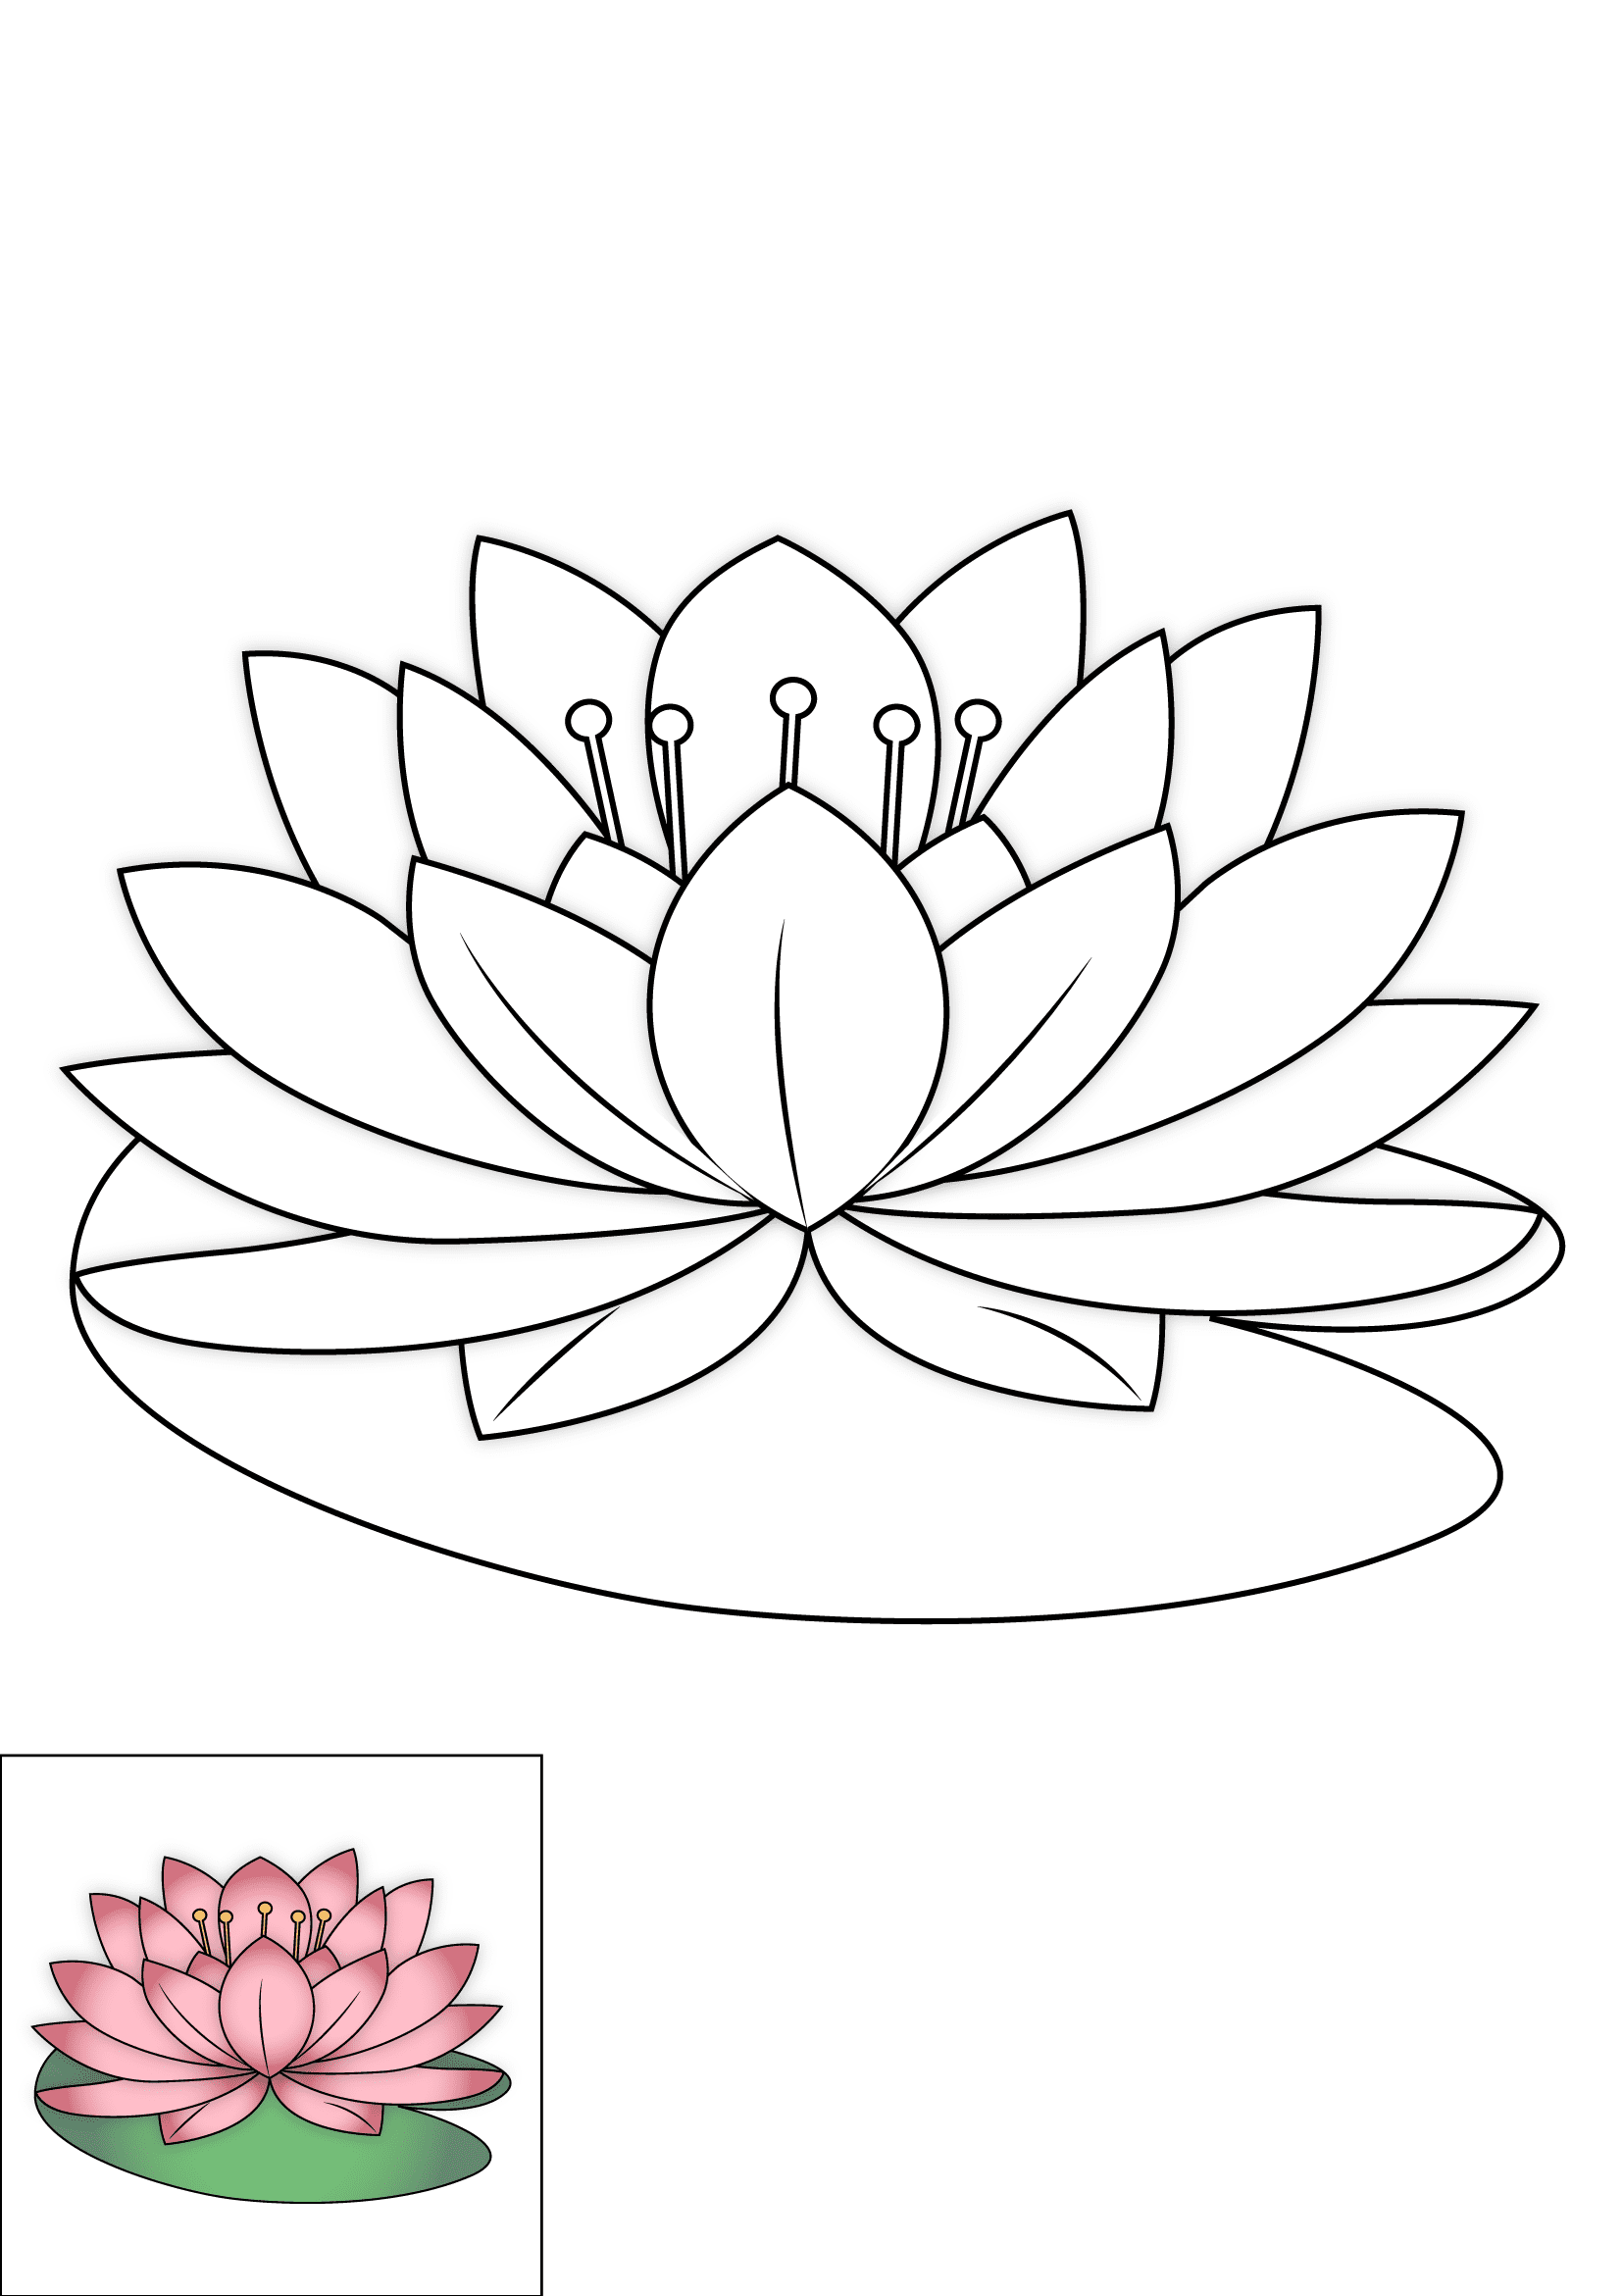 How to Draw A Lotus Flower Step by Step Printable Color